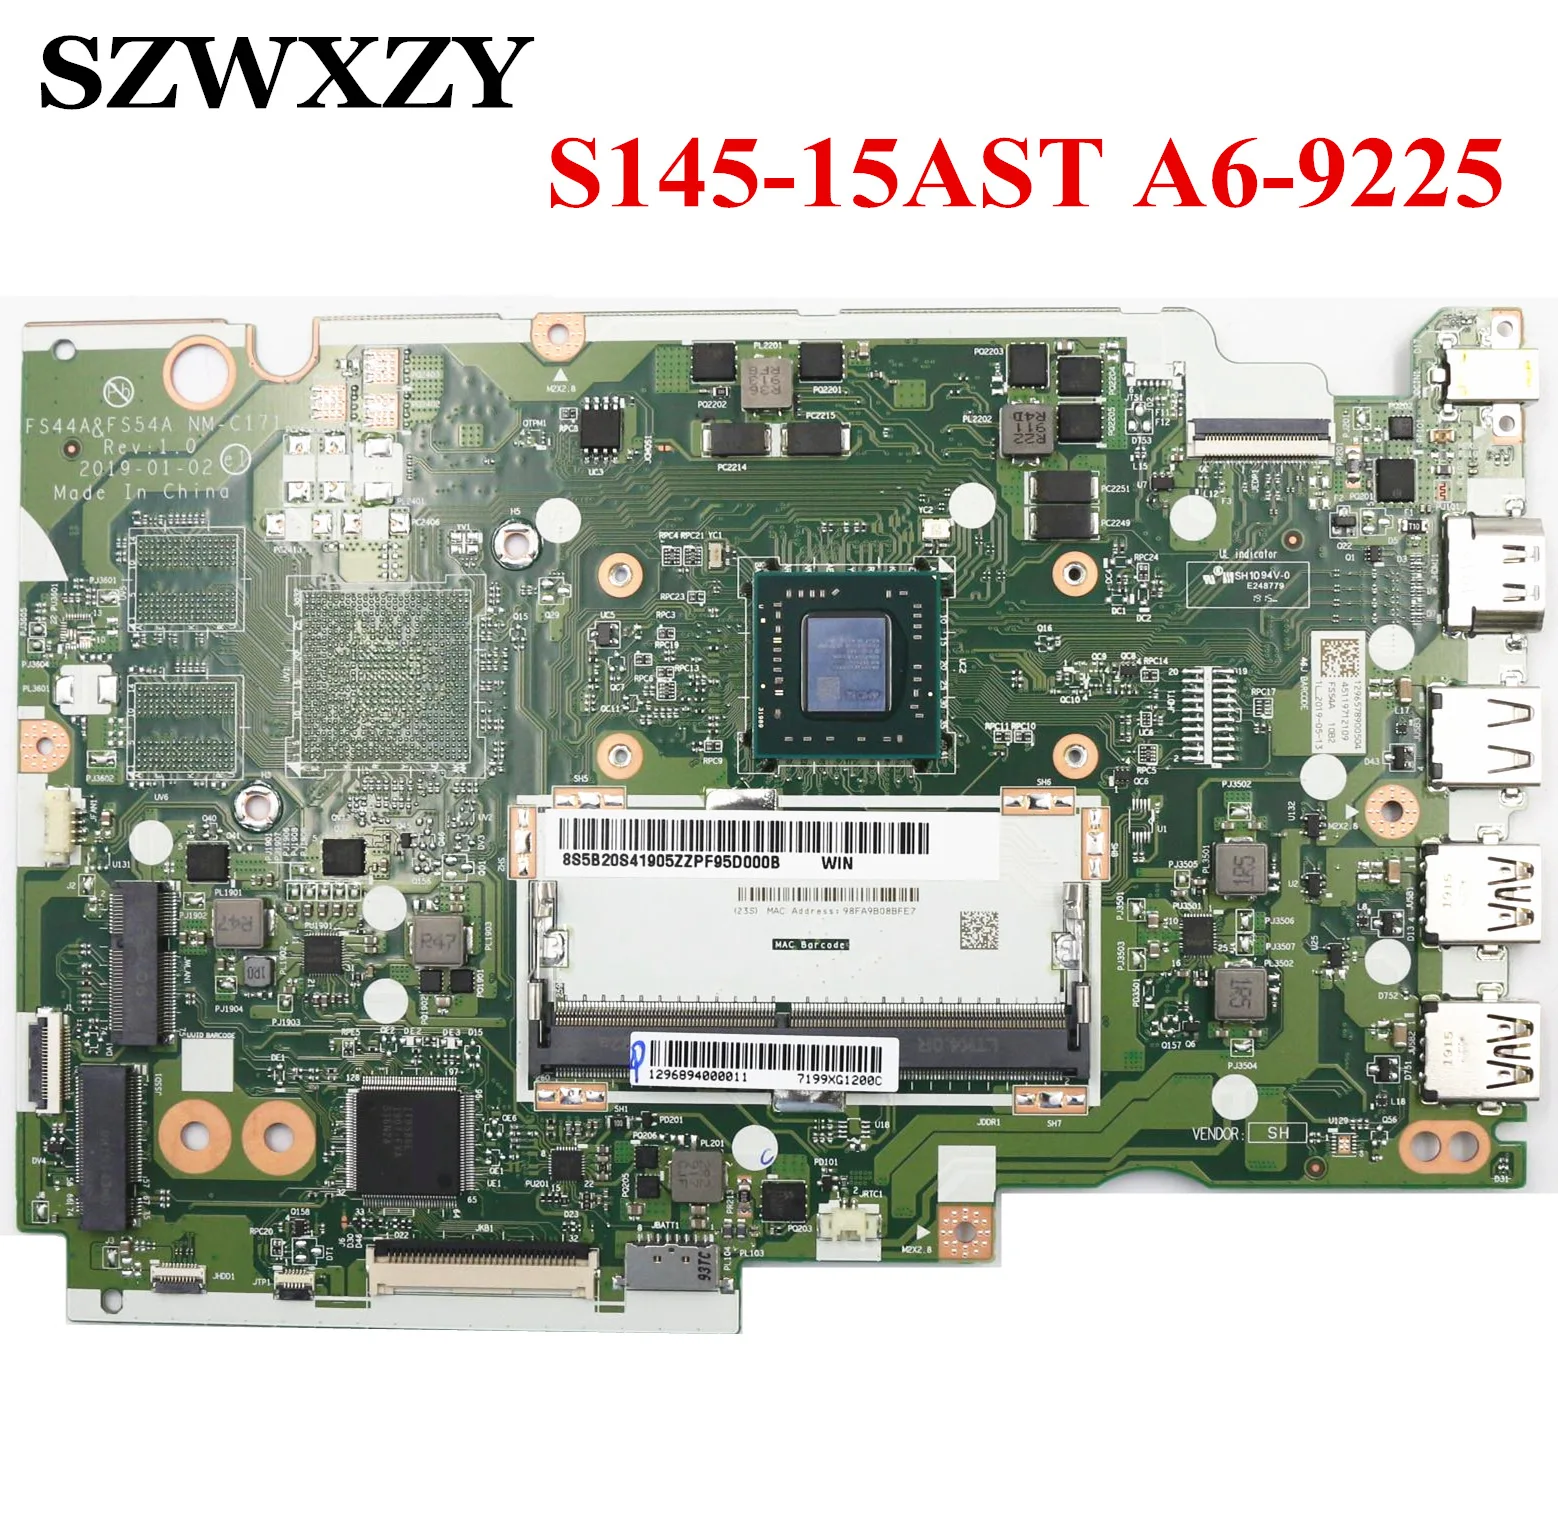 Original For Lenovo Ideapad S145-15ast Laptop Motherboard With A6-9225 Cpu  Nm-c171 5b20s41905 - Laptop Motherboard - AliExpress